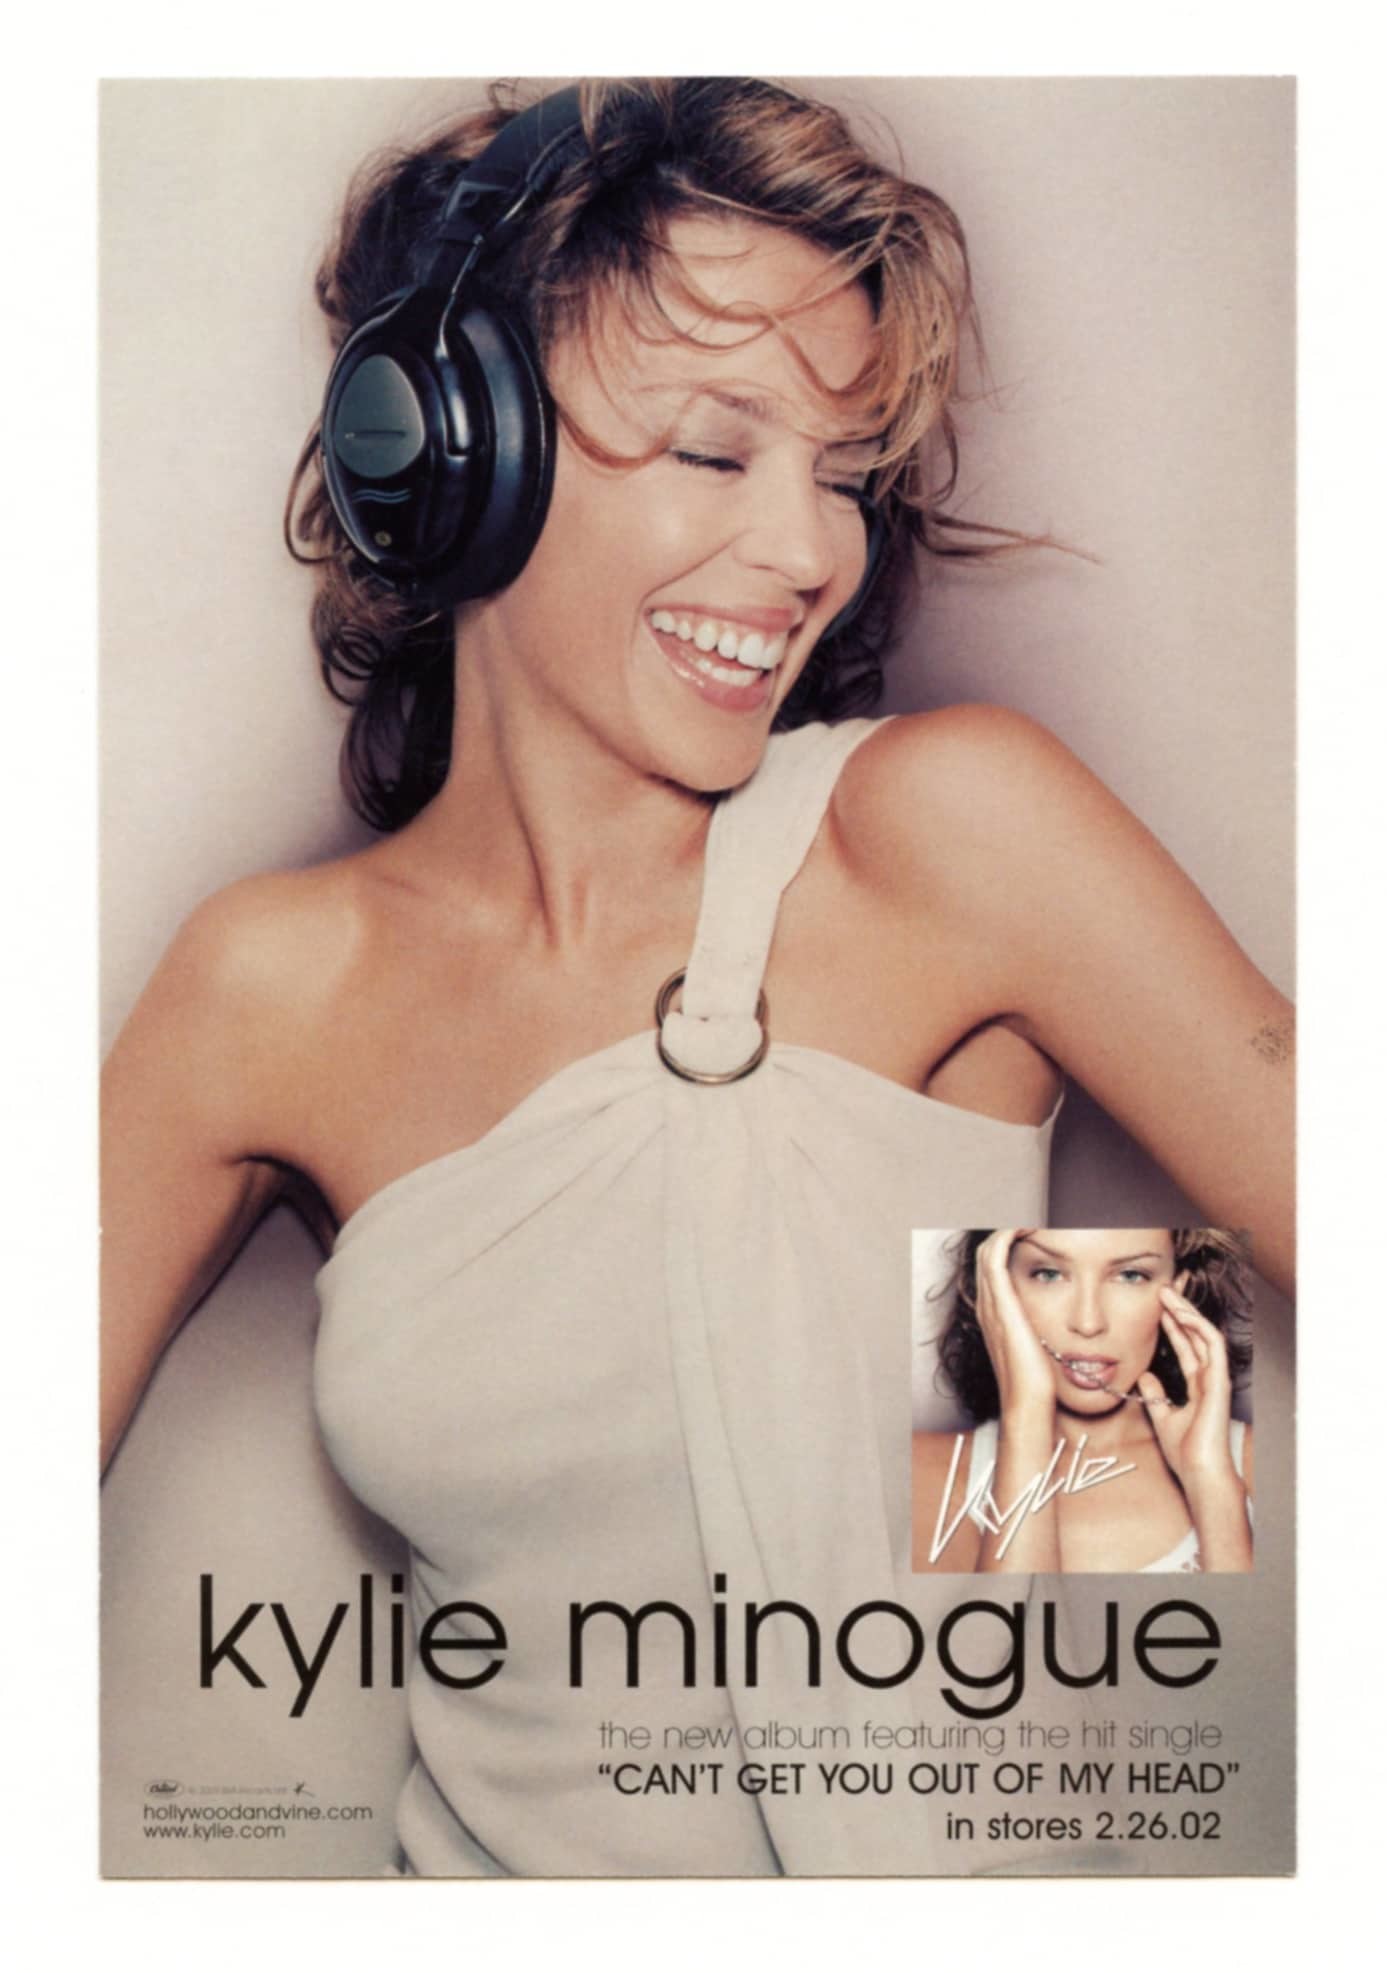 Kylie Minogue Handbill Can't Get You Out Of My Head Promo 2001 Capitol Records